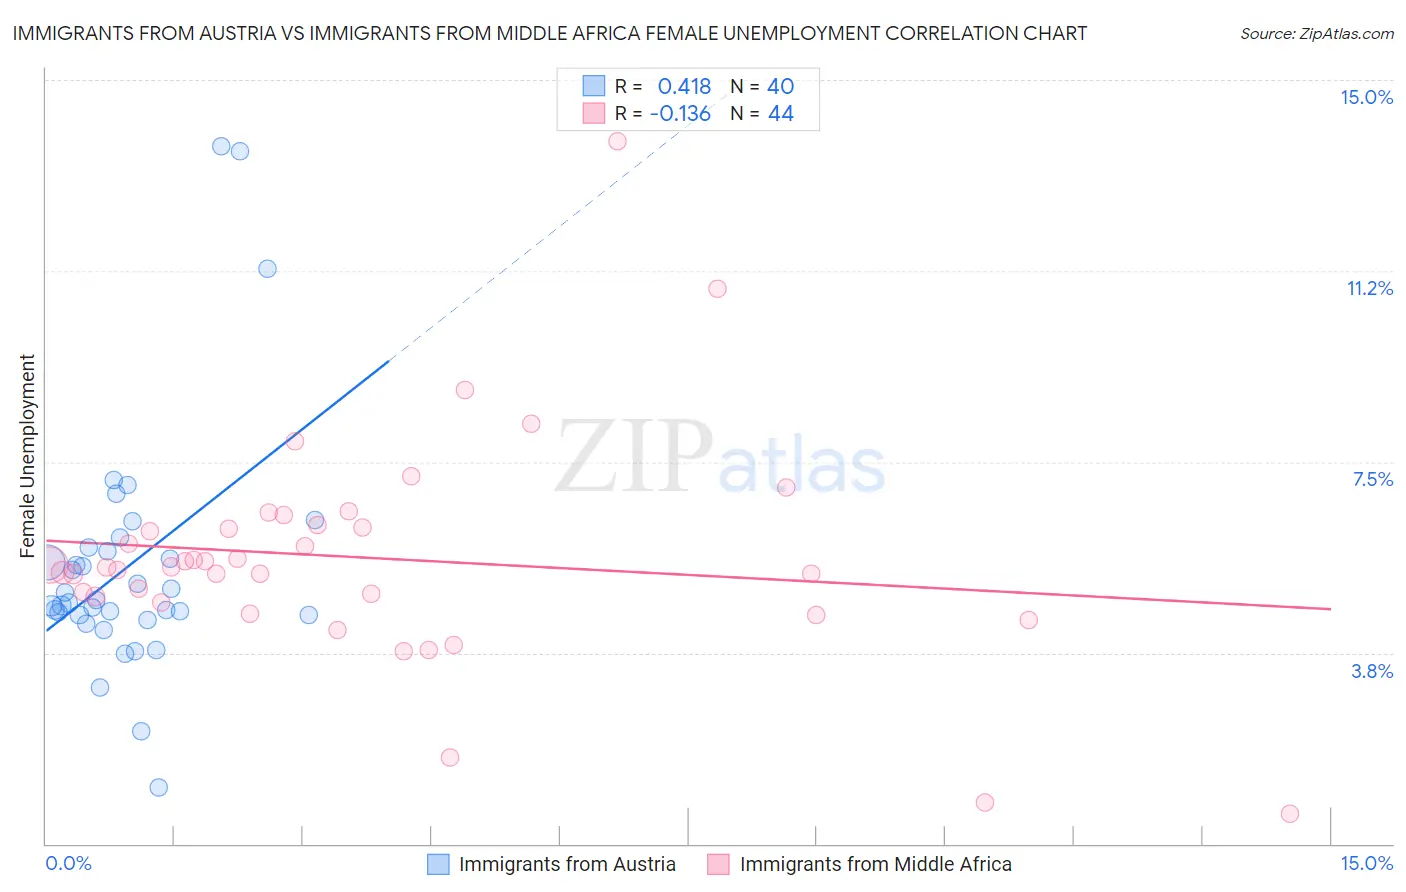 Immigrants from Austria vs Immigrants from Middle Africa Female Unemployment